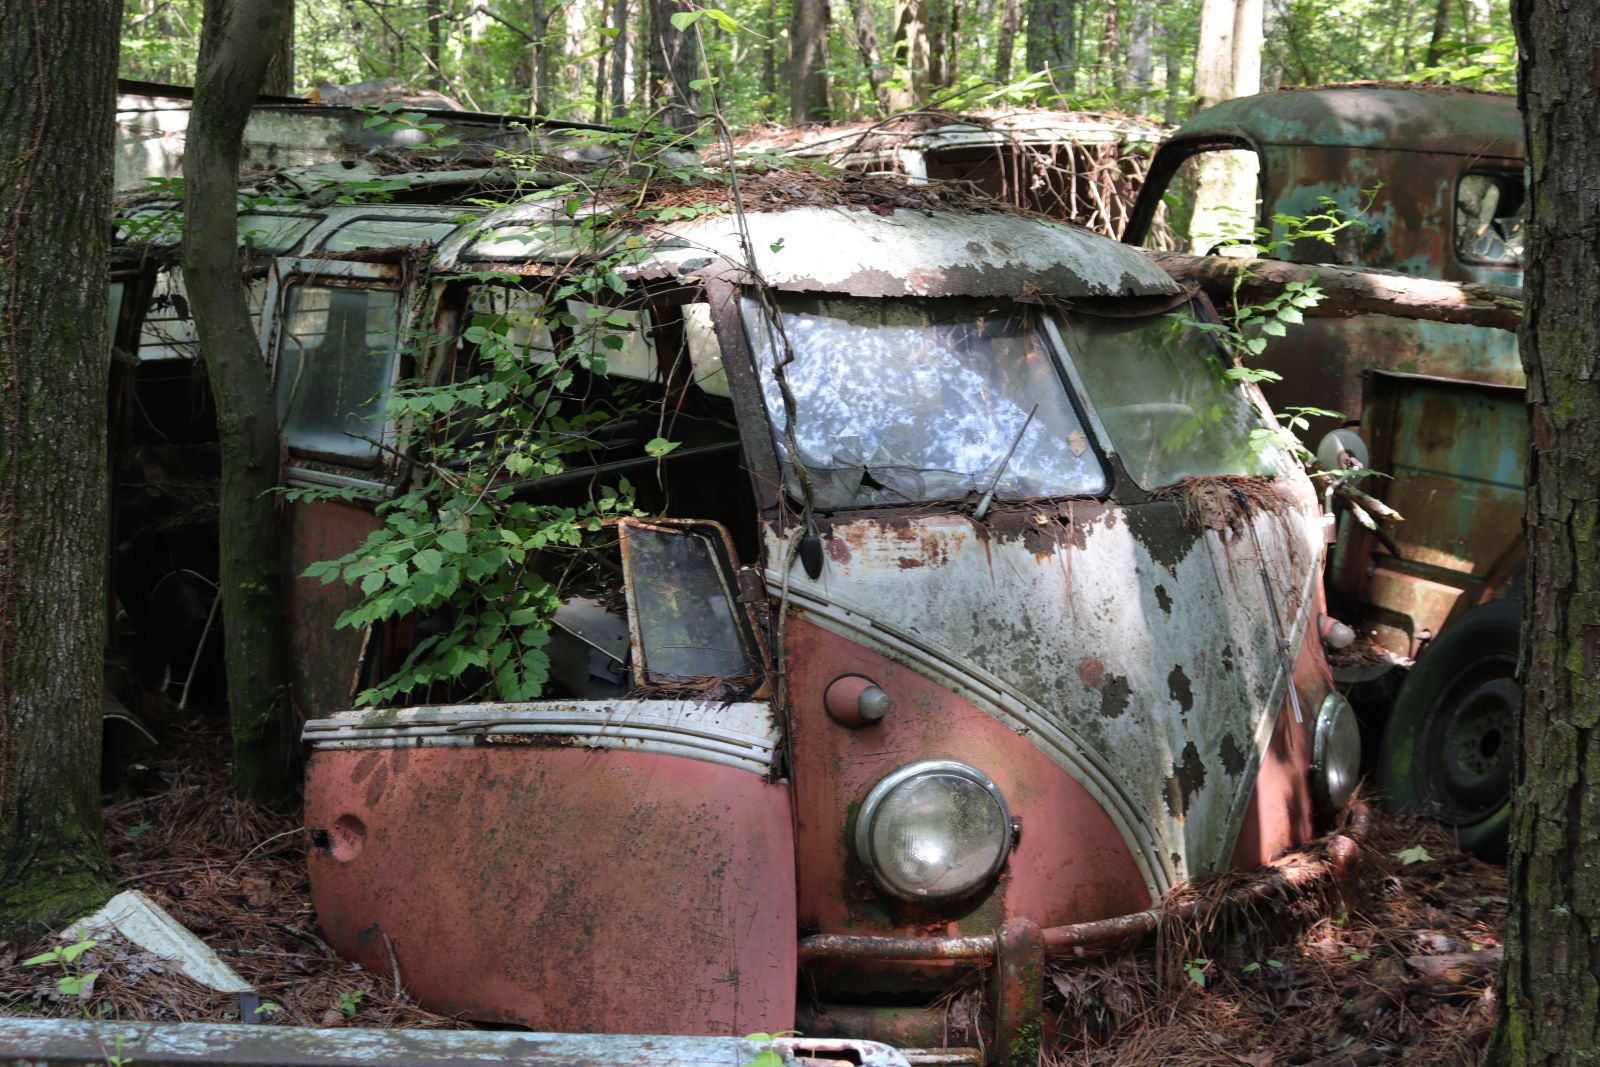 Illustration for article titled Spotted: Rare Volkswagen In The Woods